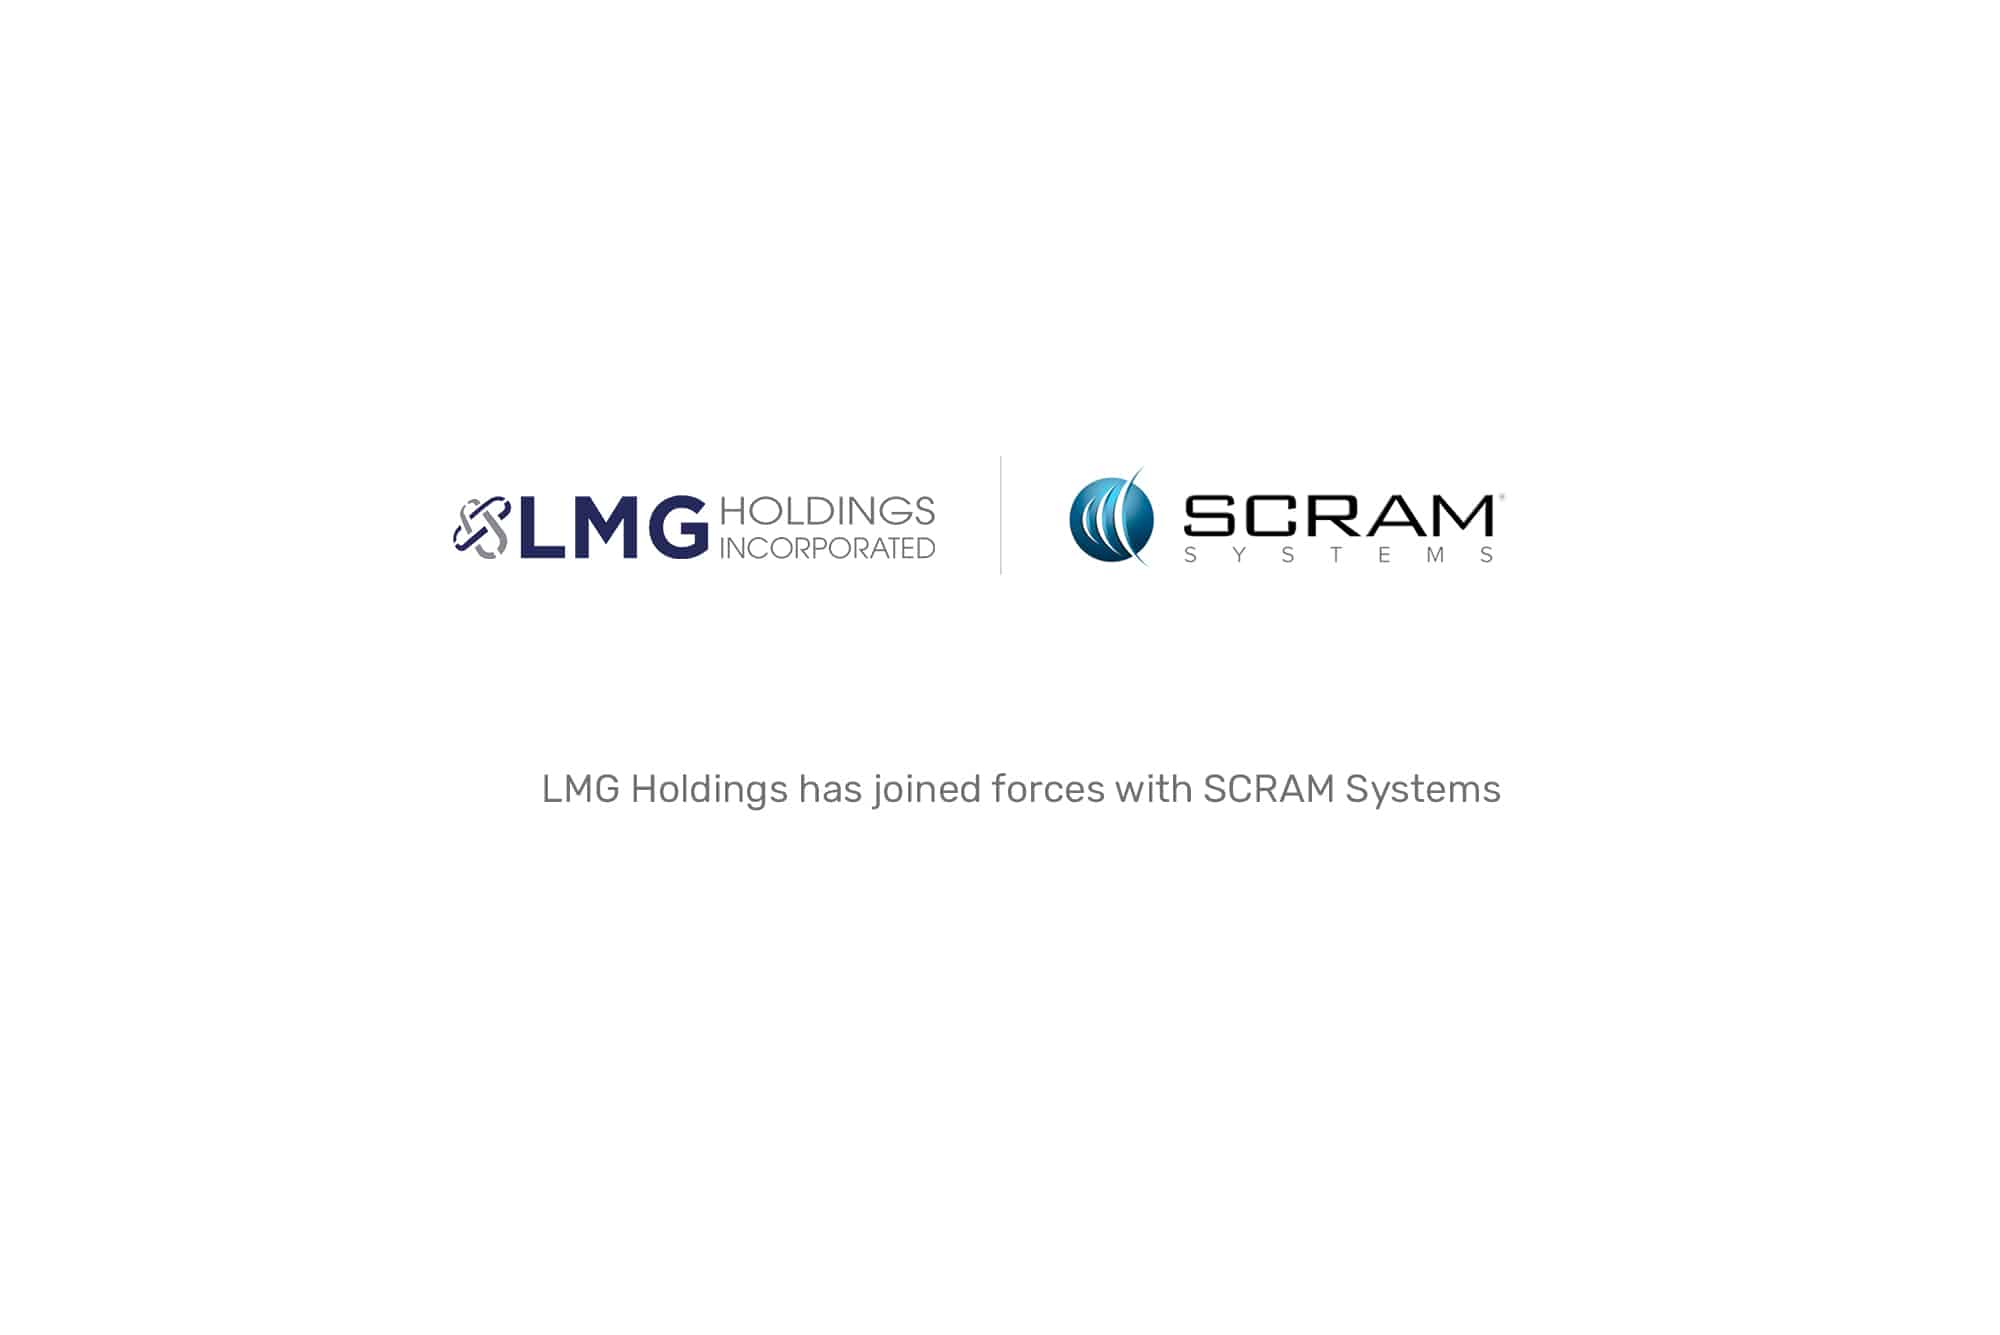 LMG Holdings has joined forces with SCRAM Systems